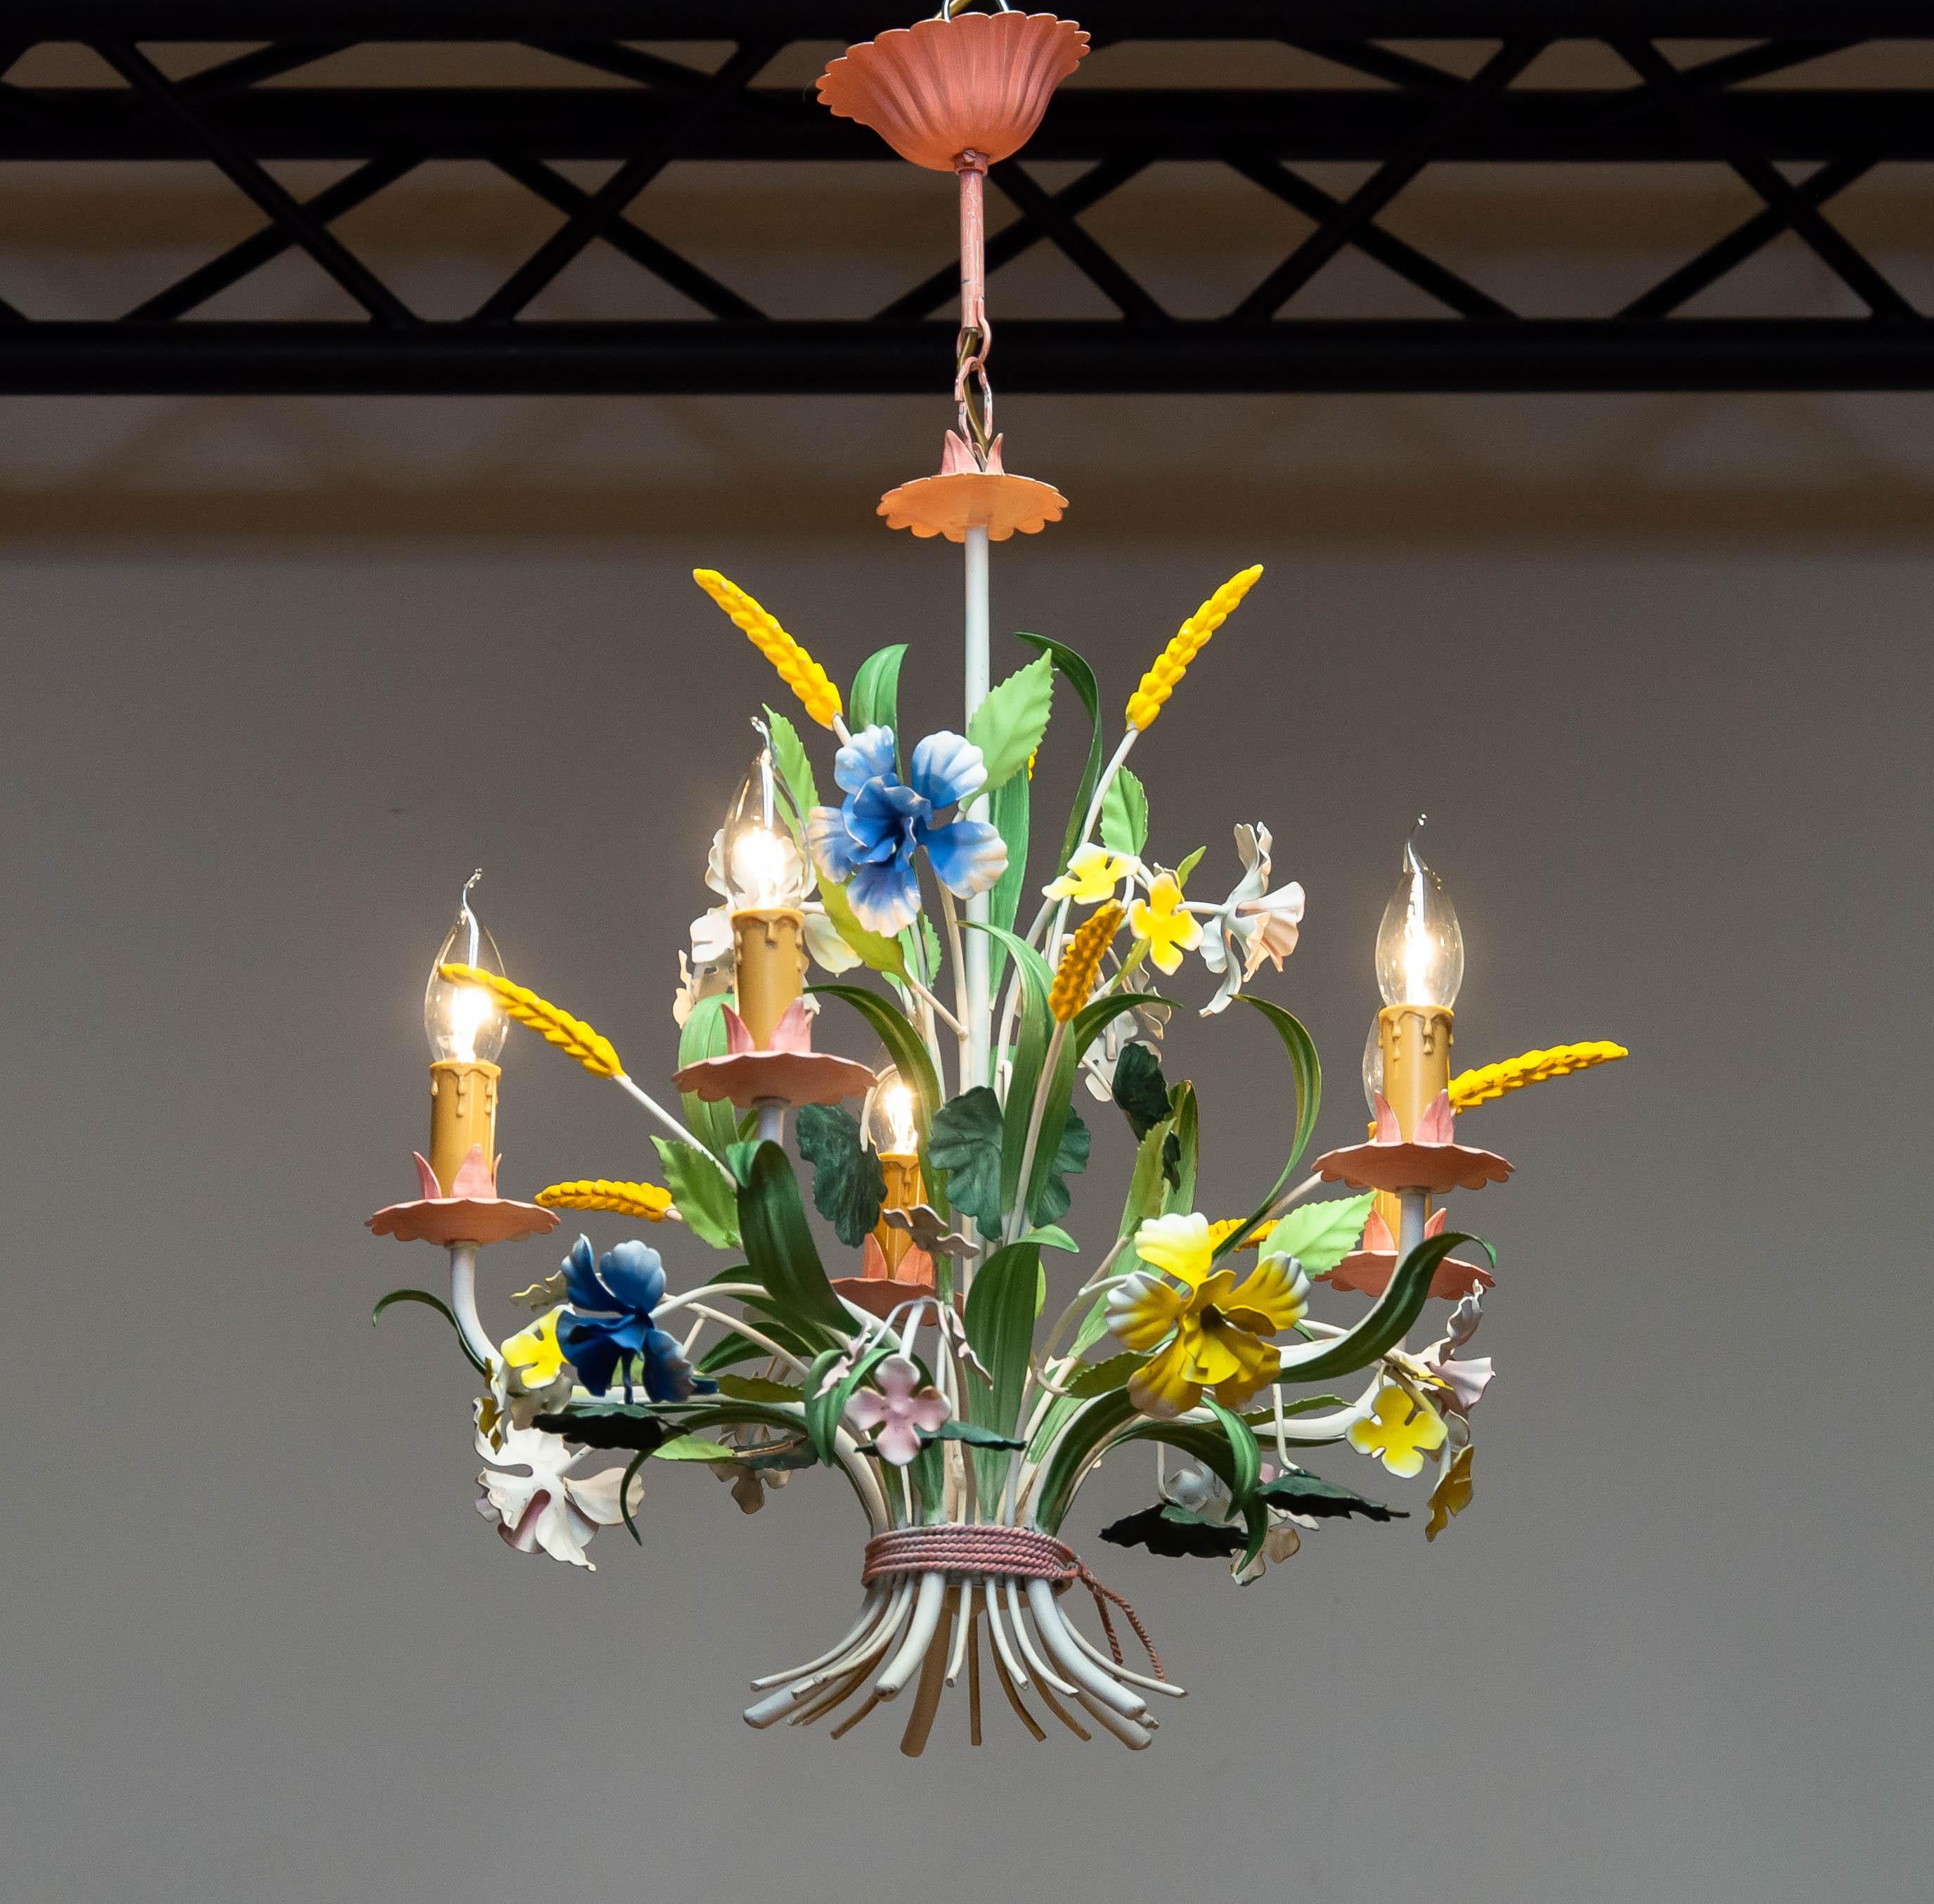 1960s Bright Boho Chic Italian Tole Painted Metal Chandelier With Floral Decor For Sale 1